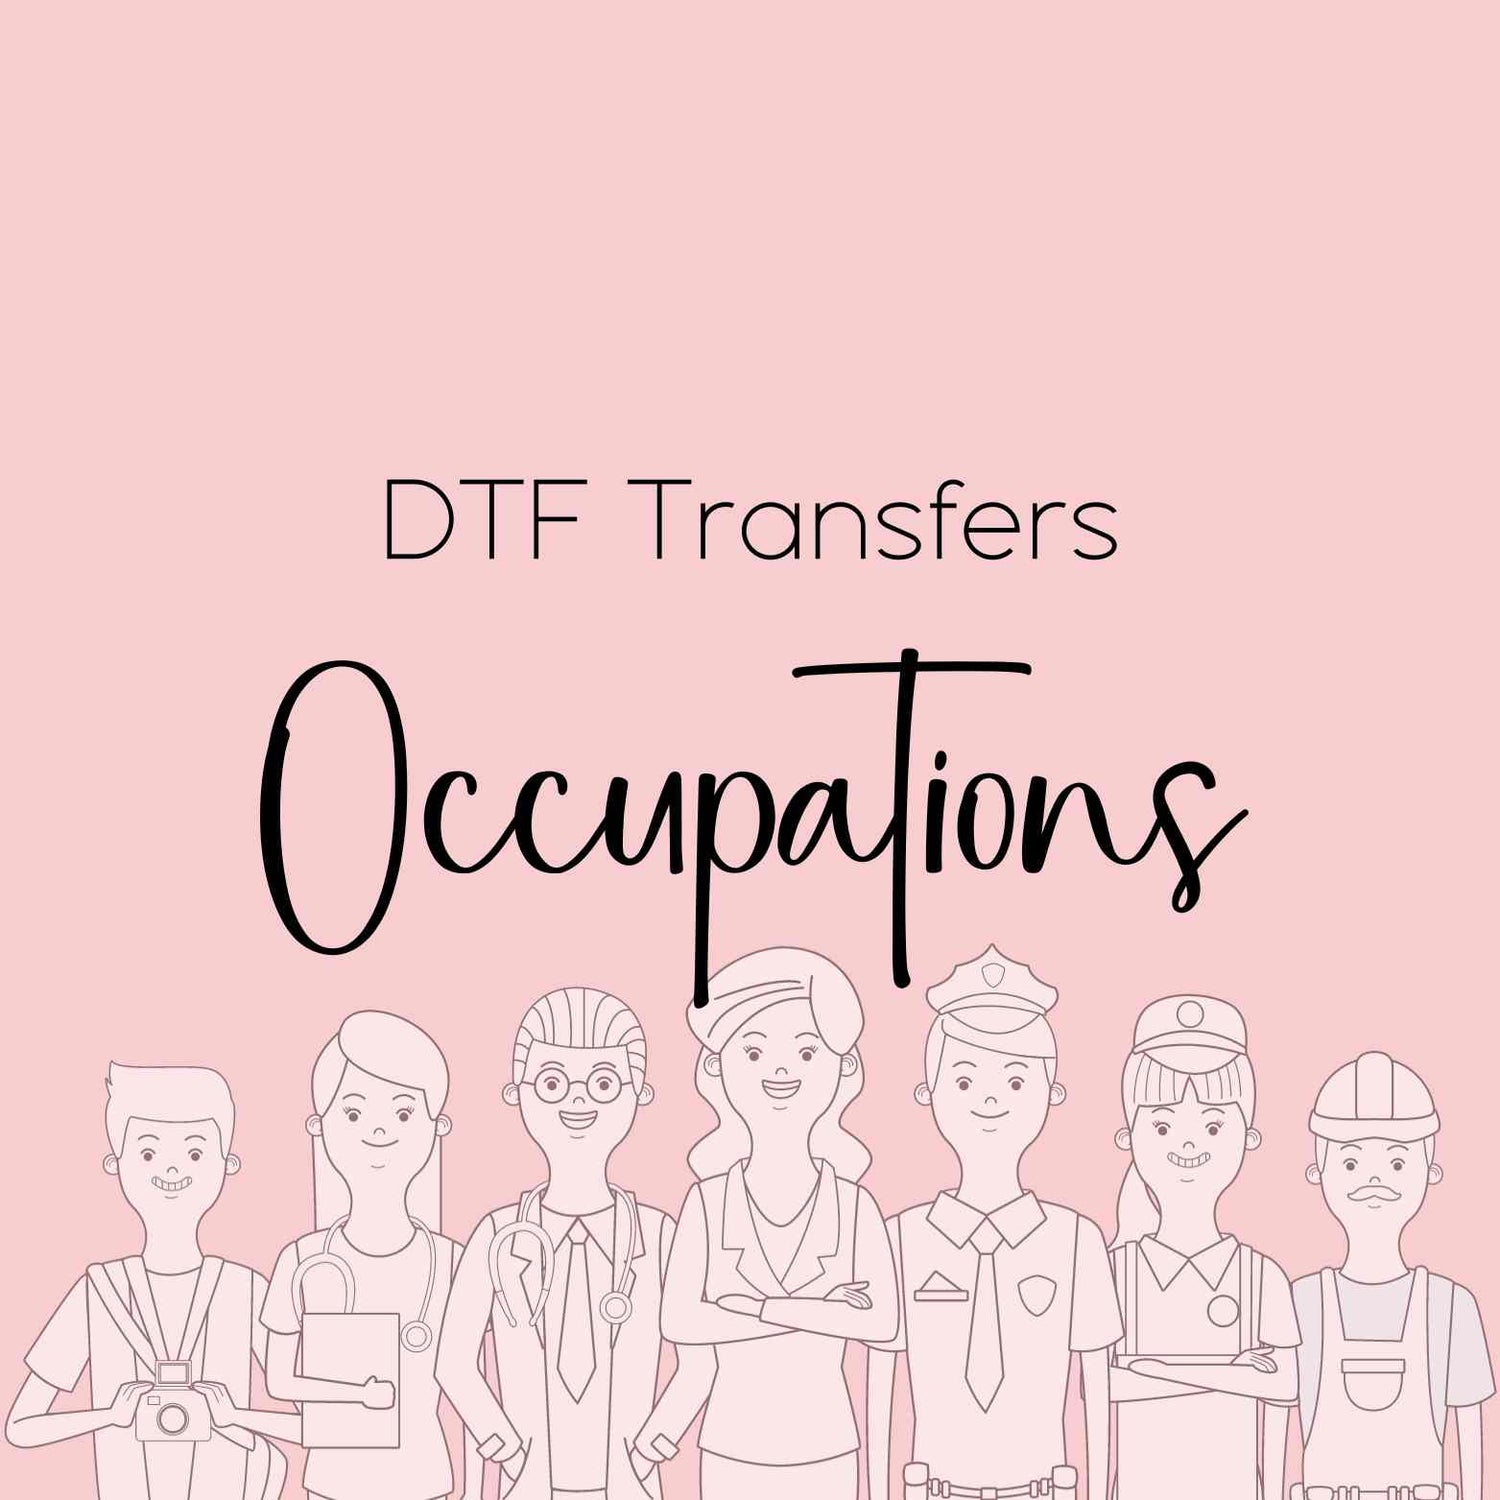 Occupations DTF Transfers